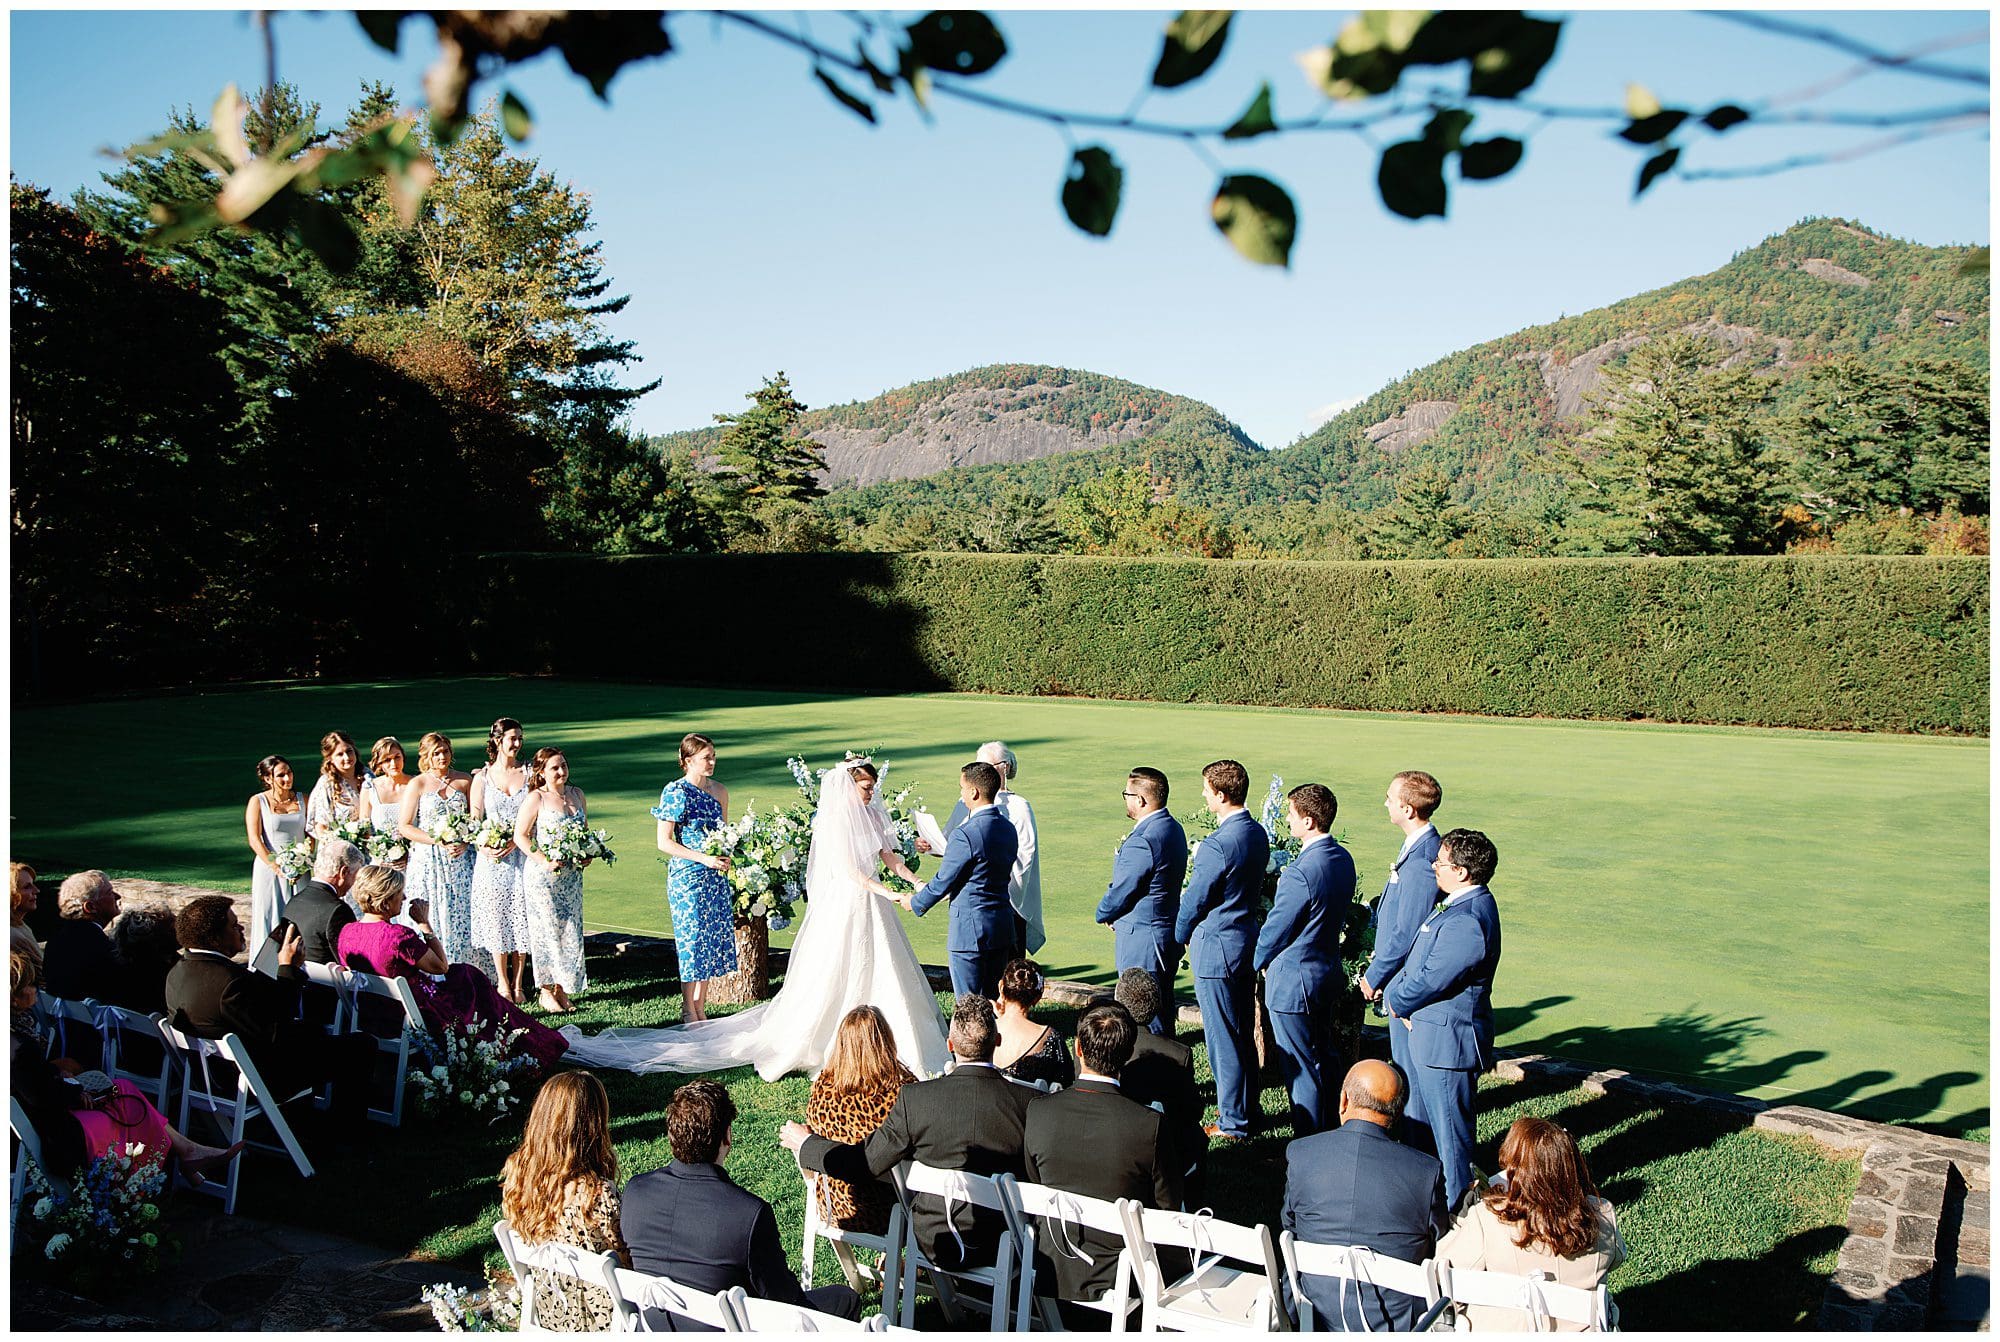 A wedding ceremony in a grassy field with mountains in the background.